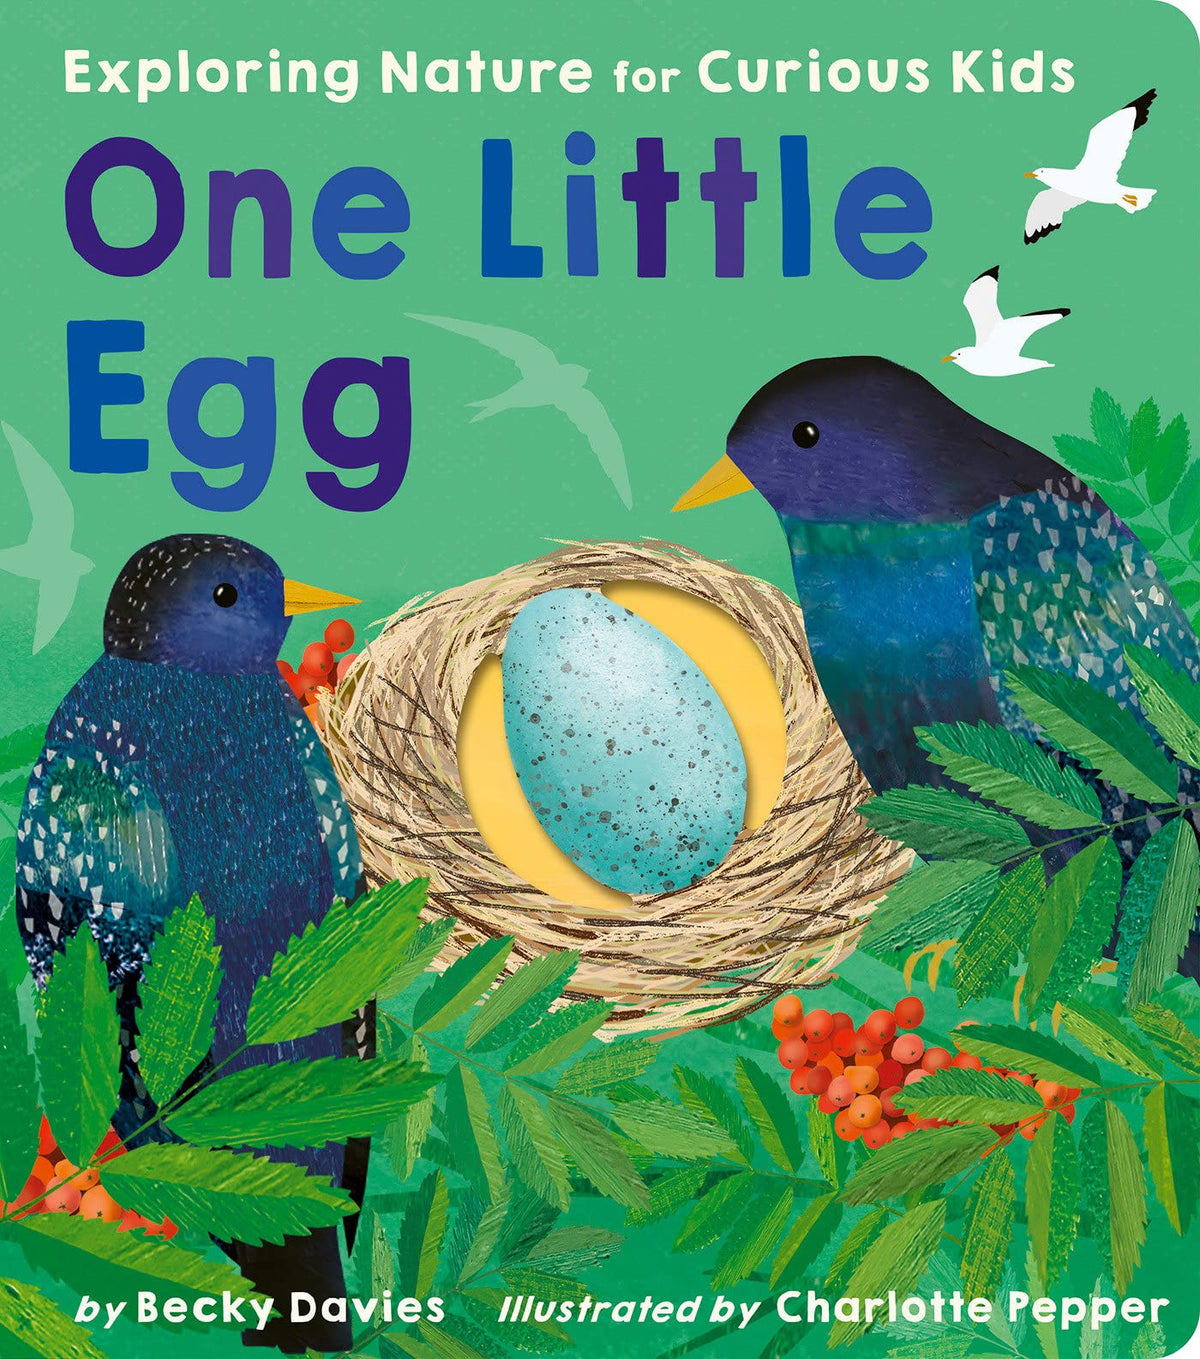 Exploring Nature for Curious Kids: One Little Egg